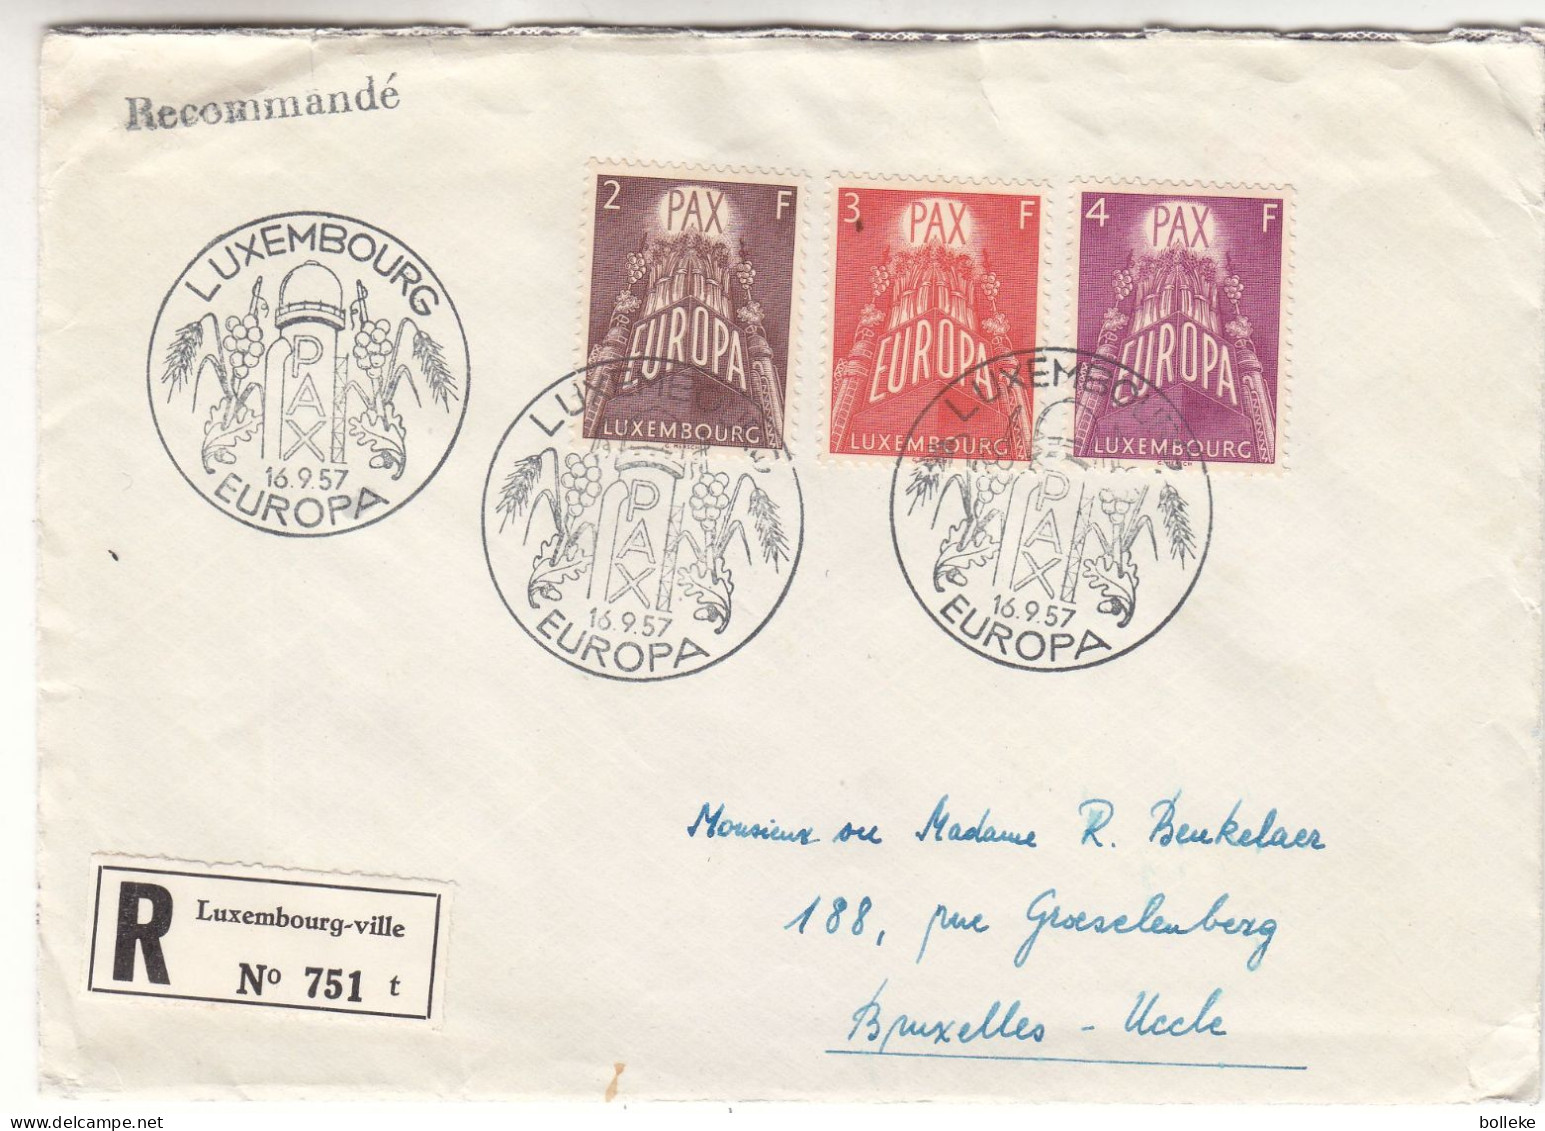 Luxembourg - Lettre FDC Recom De 1957 - Oblit Luxembourg - Europa 57 -  Valeur 75 Euros - Covers & Documents